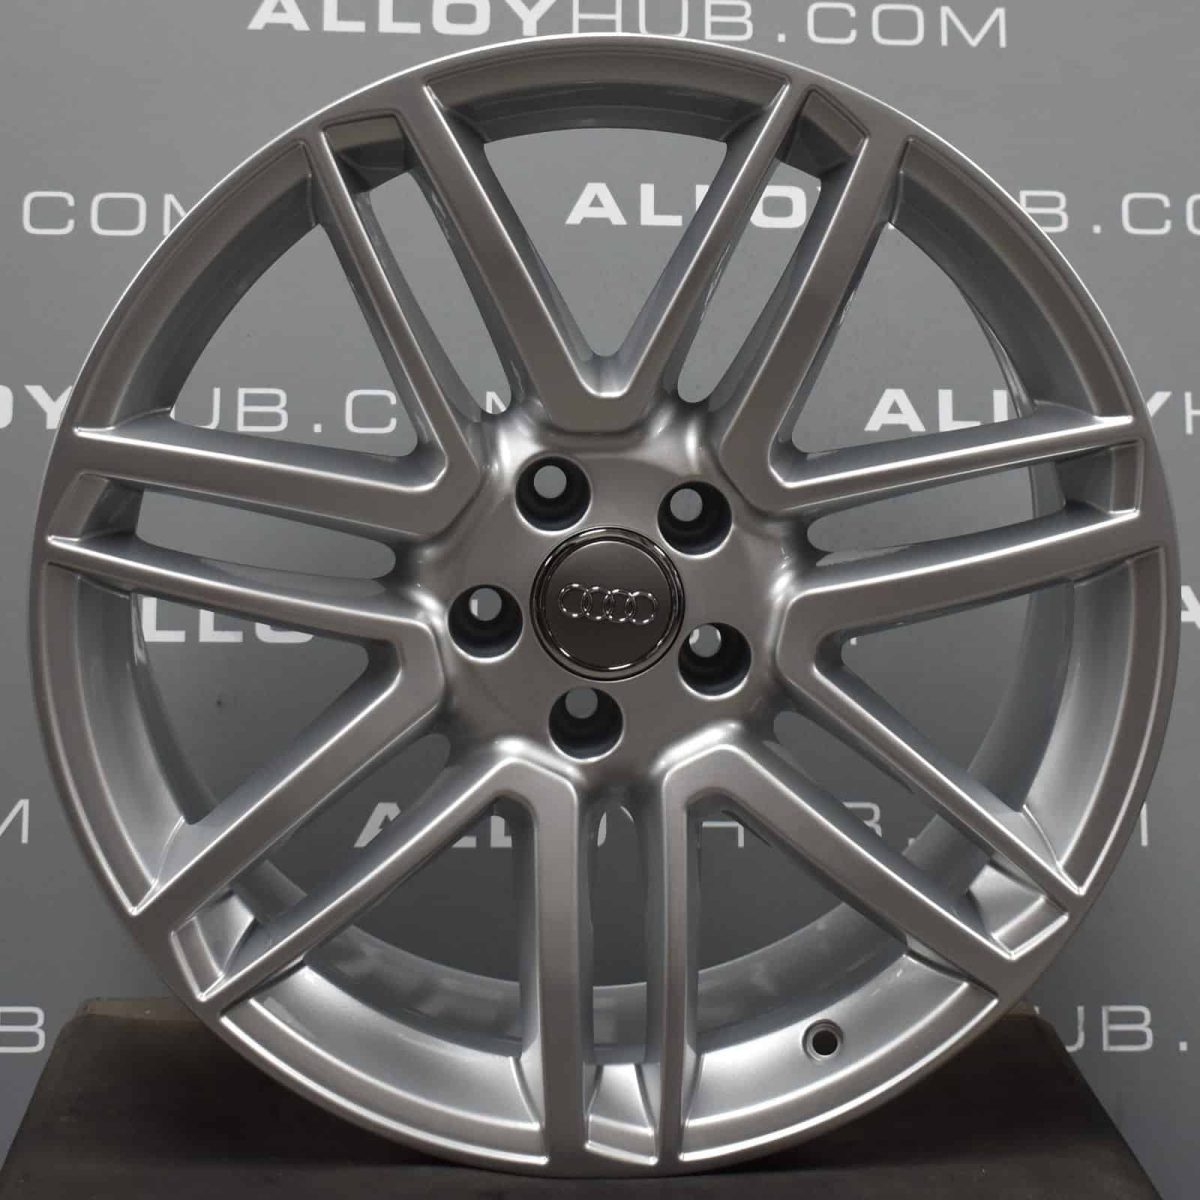 Genuine Audi A7 S7 RS7 A8 S8 4G 4H 7 Double Spoke 19" Inch Alloy Wheels with Silver Finish 4H0 601 025 CA